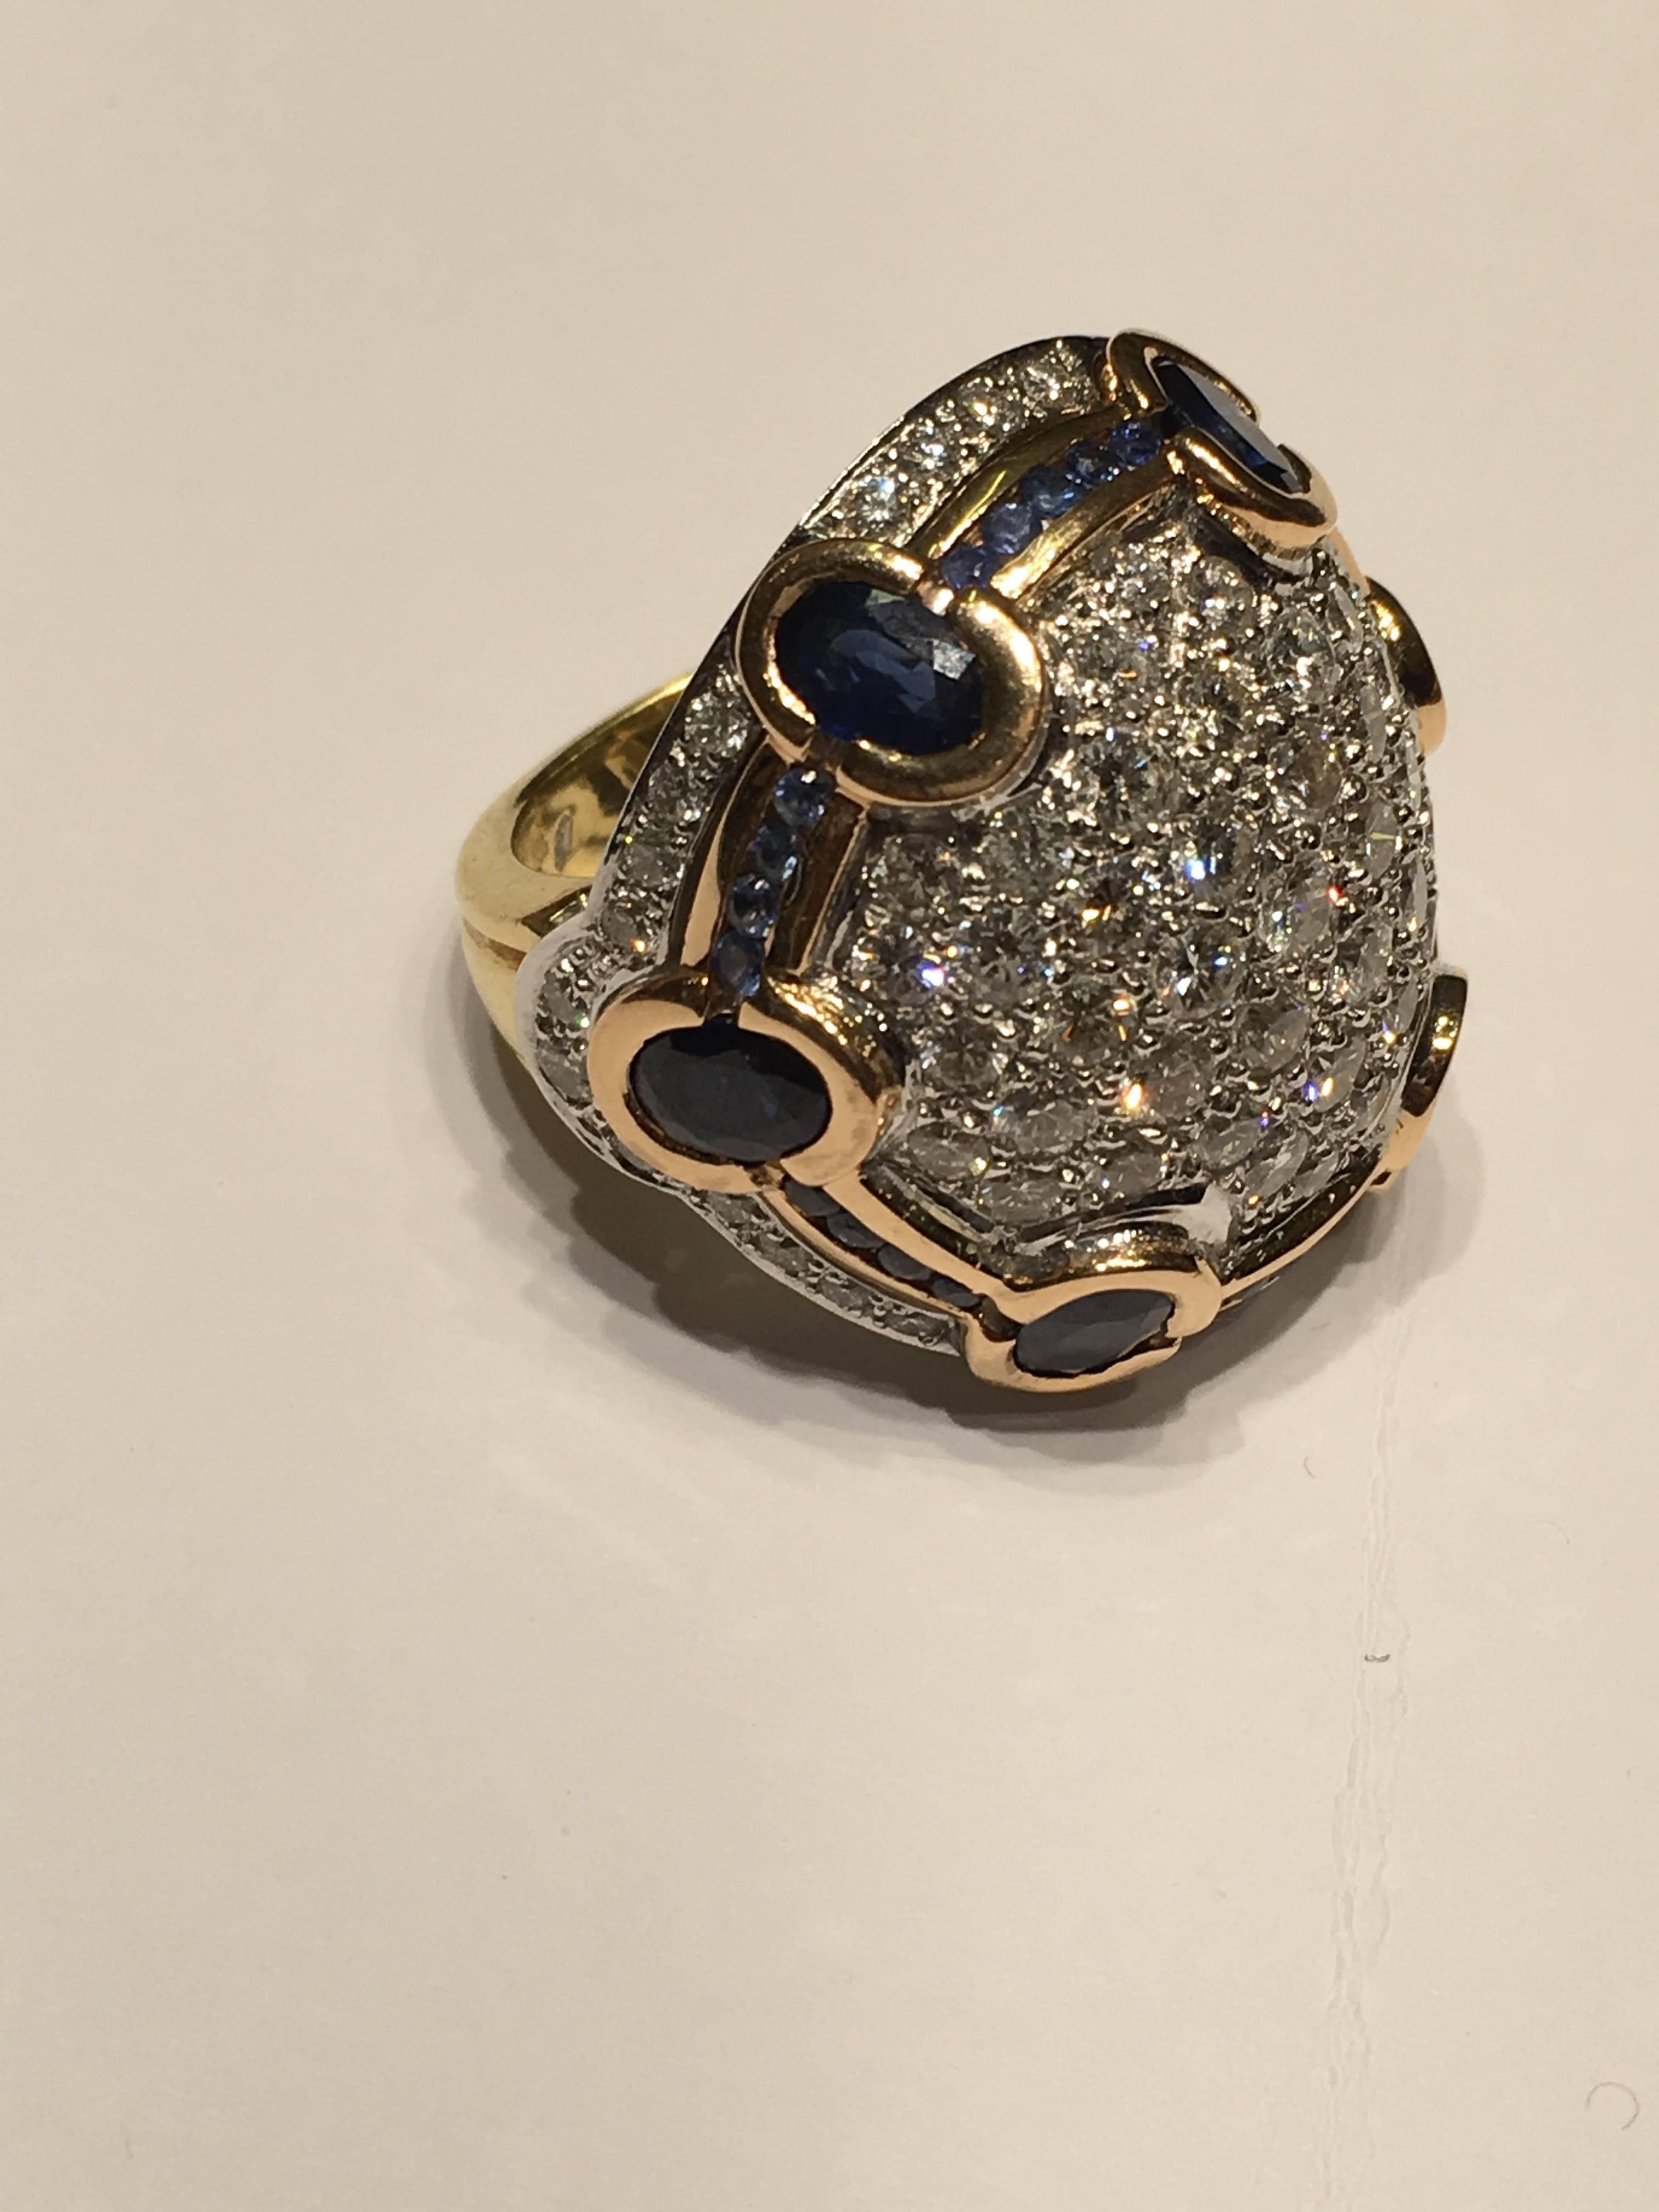 This beautiful Bombay Pave Ring is set with diamonds and sapphires in 18ct
Yellow and White Gold. With Oval and Round Sapphires
Approx 6CTS of Sapphires and 5CTS Plus of Diamonds of high Colour
SIZE UK (O)  SIZE US ( 7!/2)
Can be sized free of